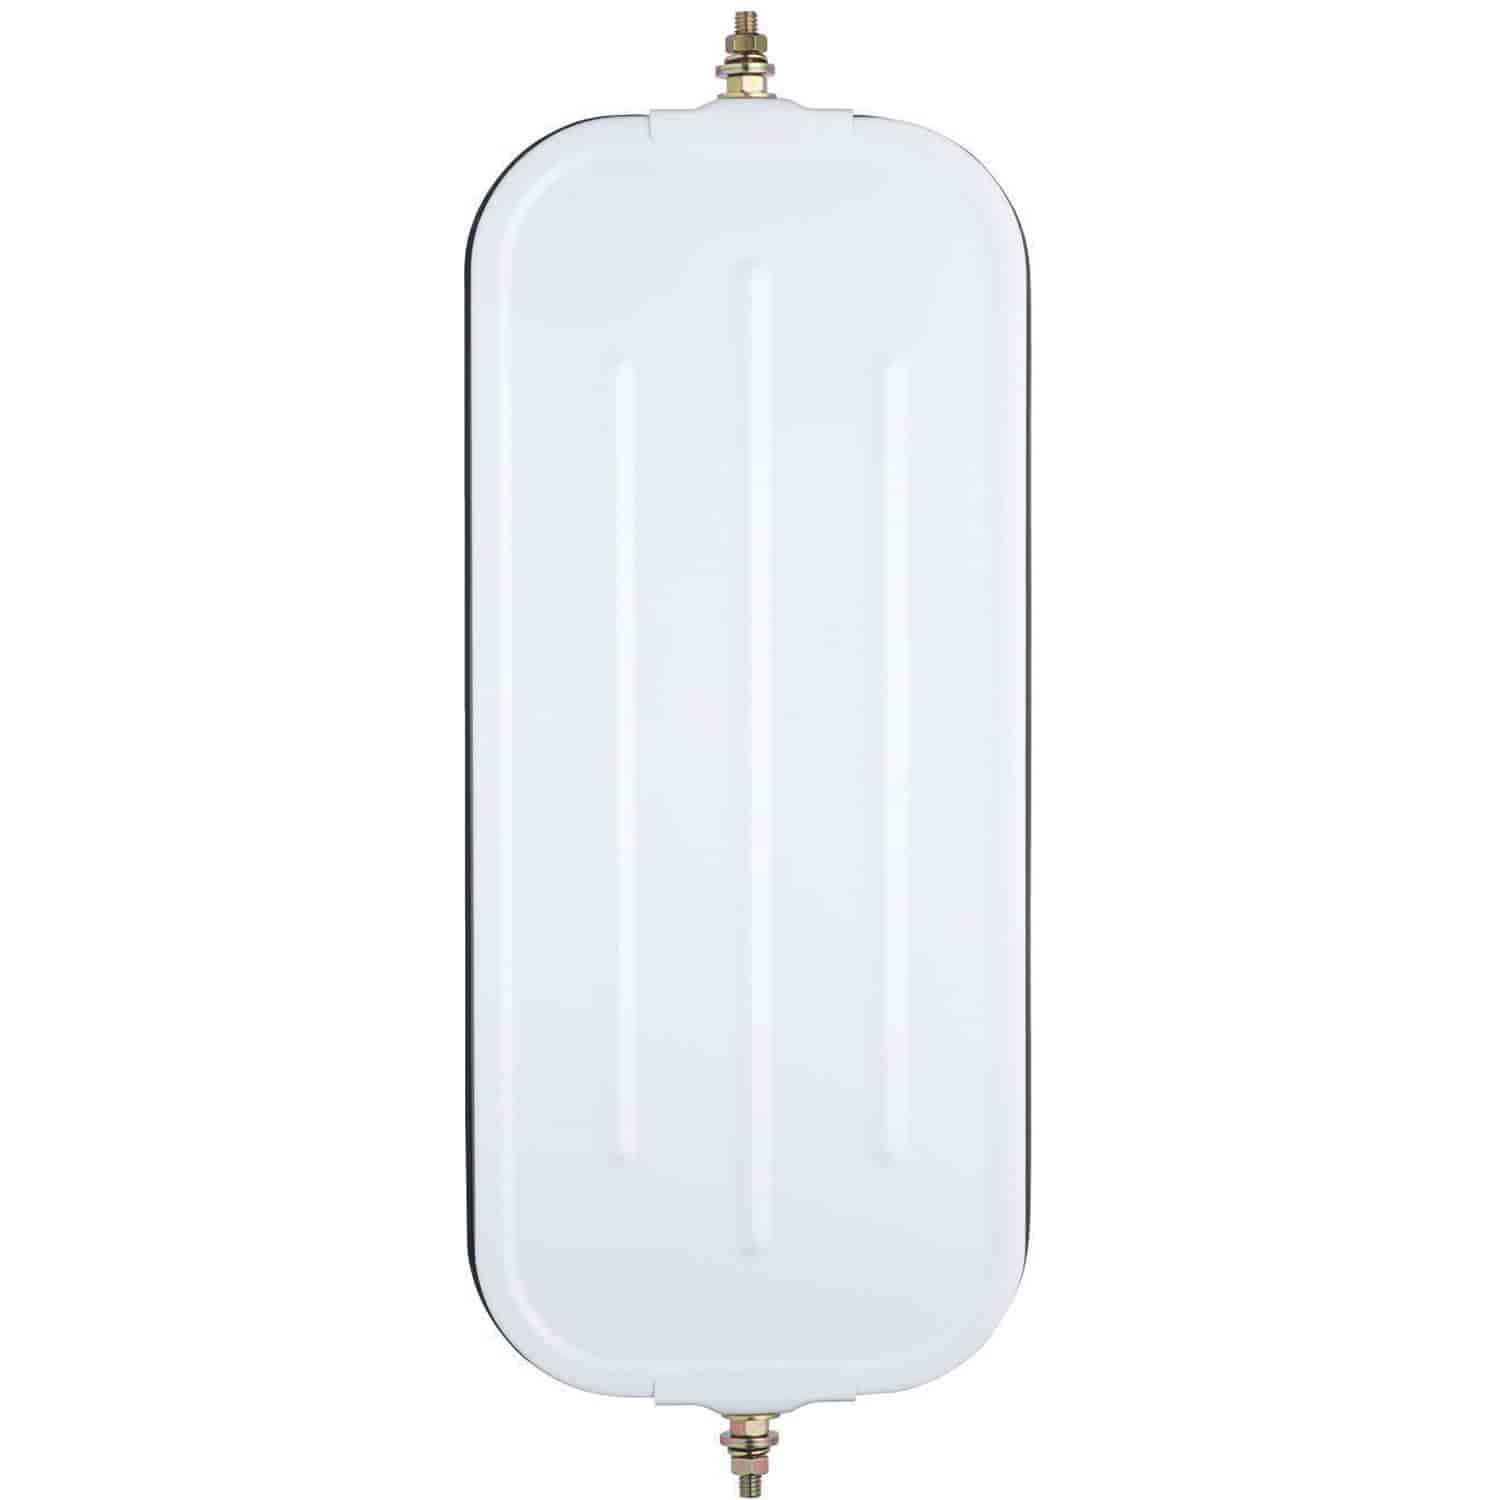 Replacement West Coast Mirror Head Ribbed back